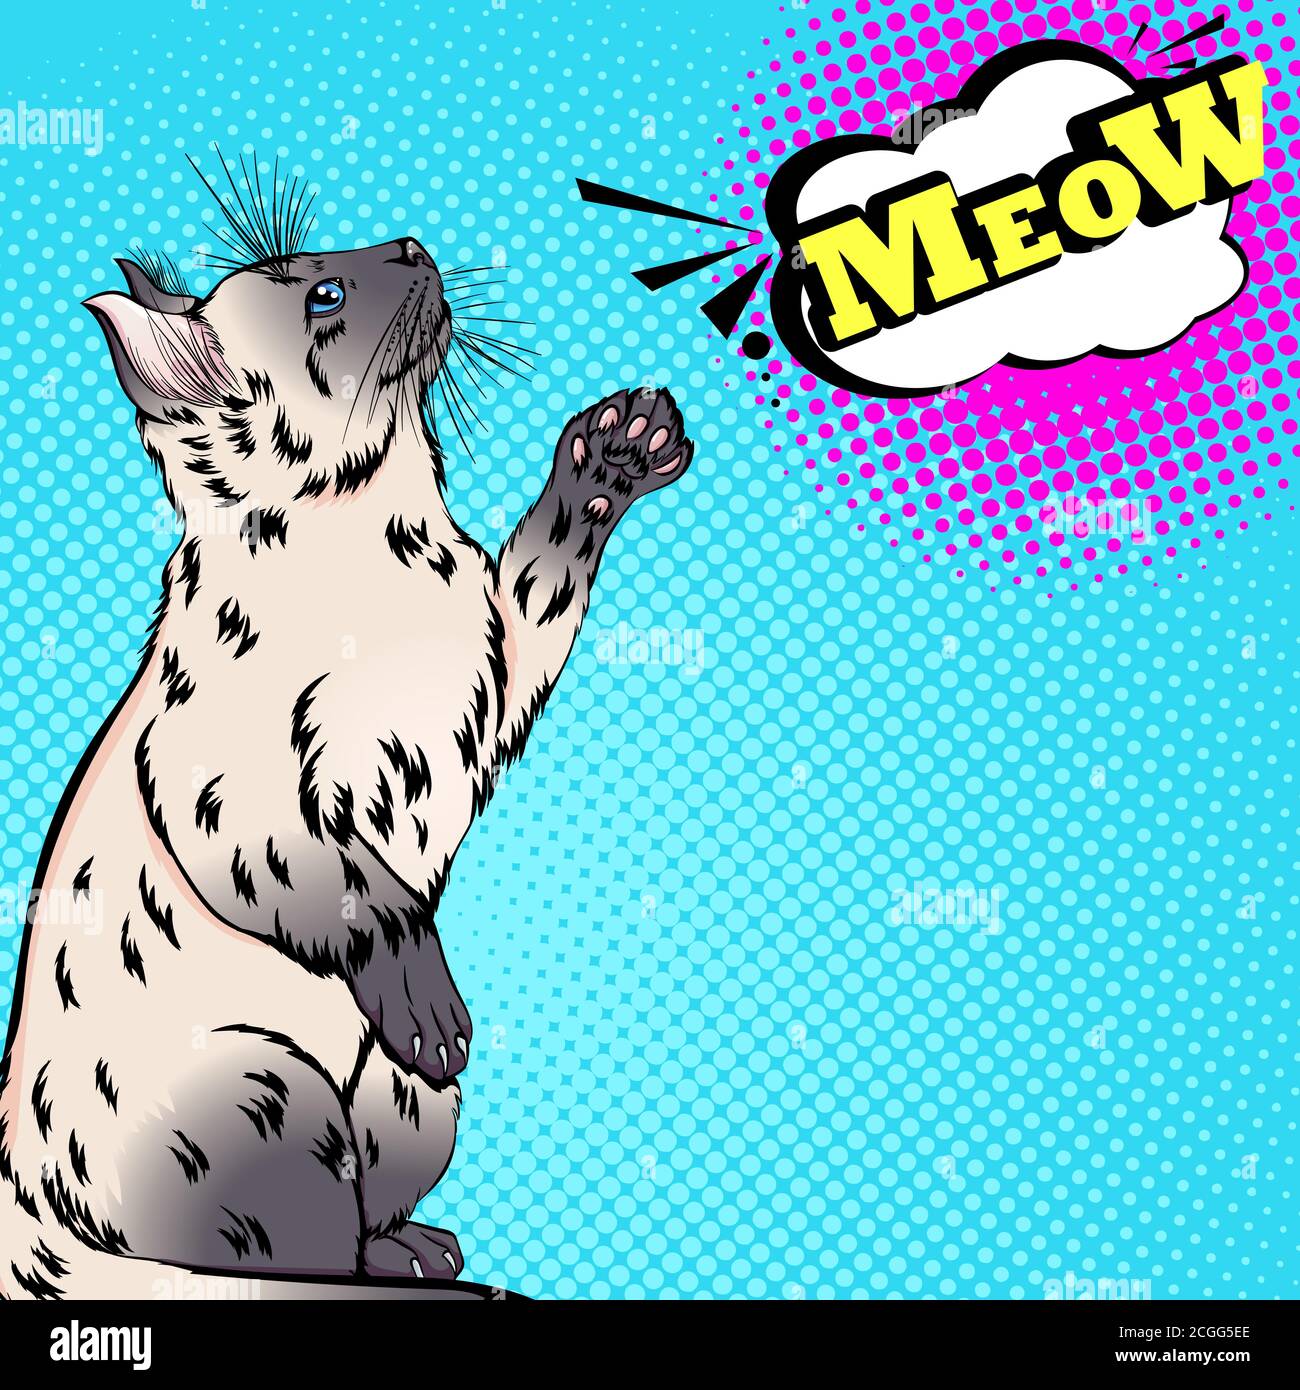 Siamese or Thai cat breed standing on two hind legs with meow speech bubble. Bright vector illustration in pop art retro style. Design for print, poster Stock Vector